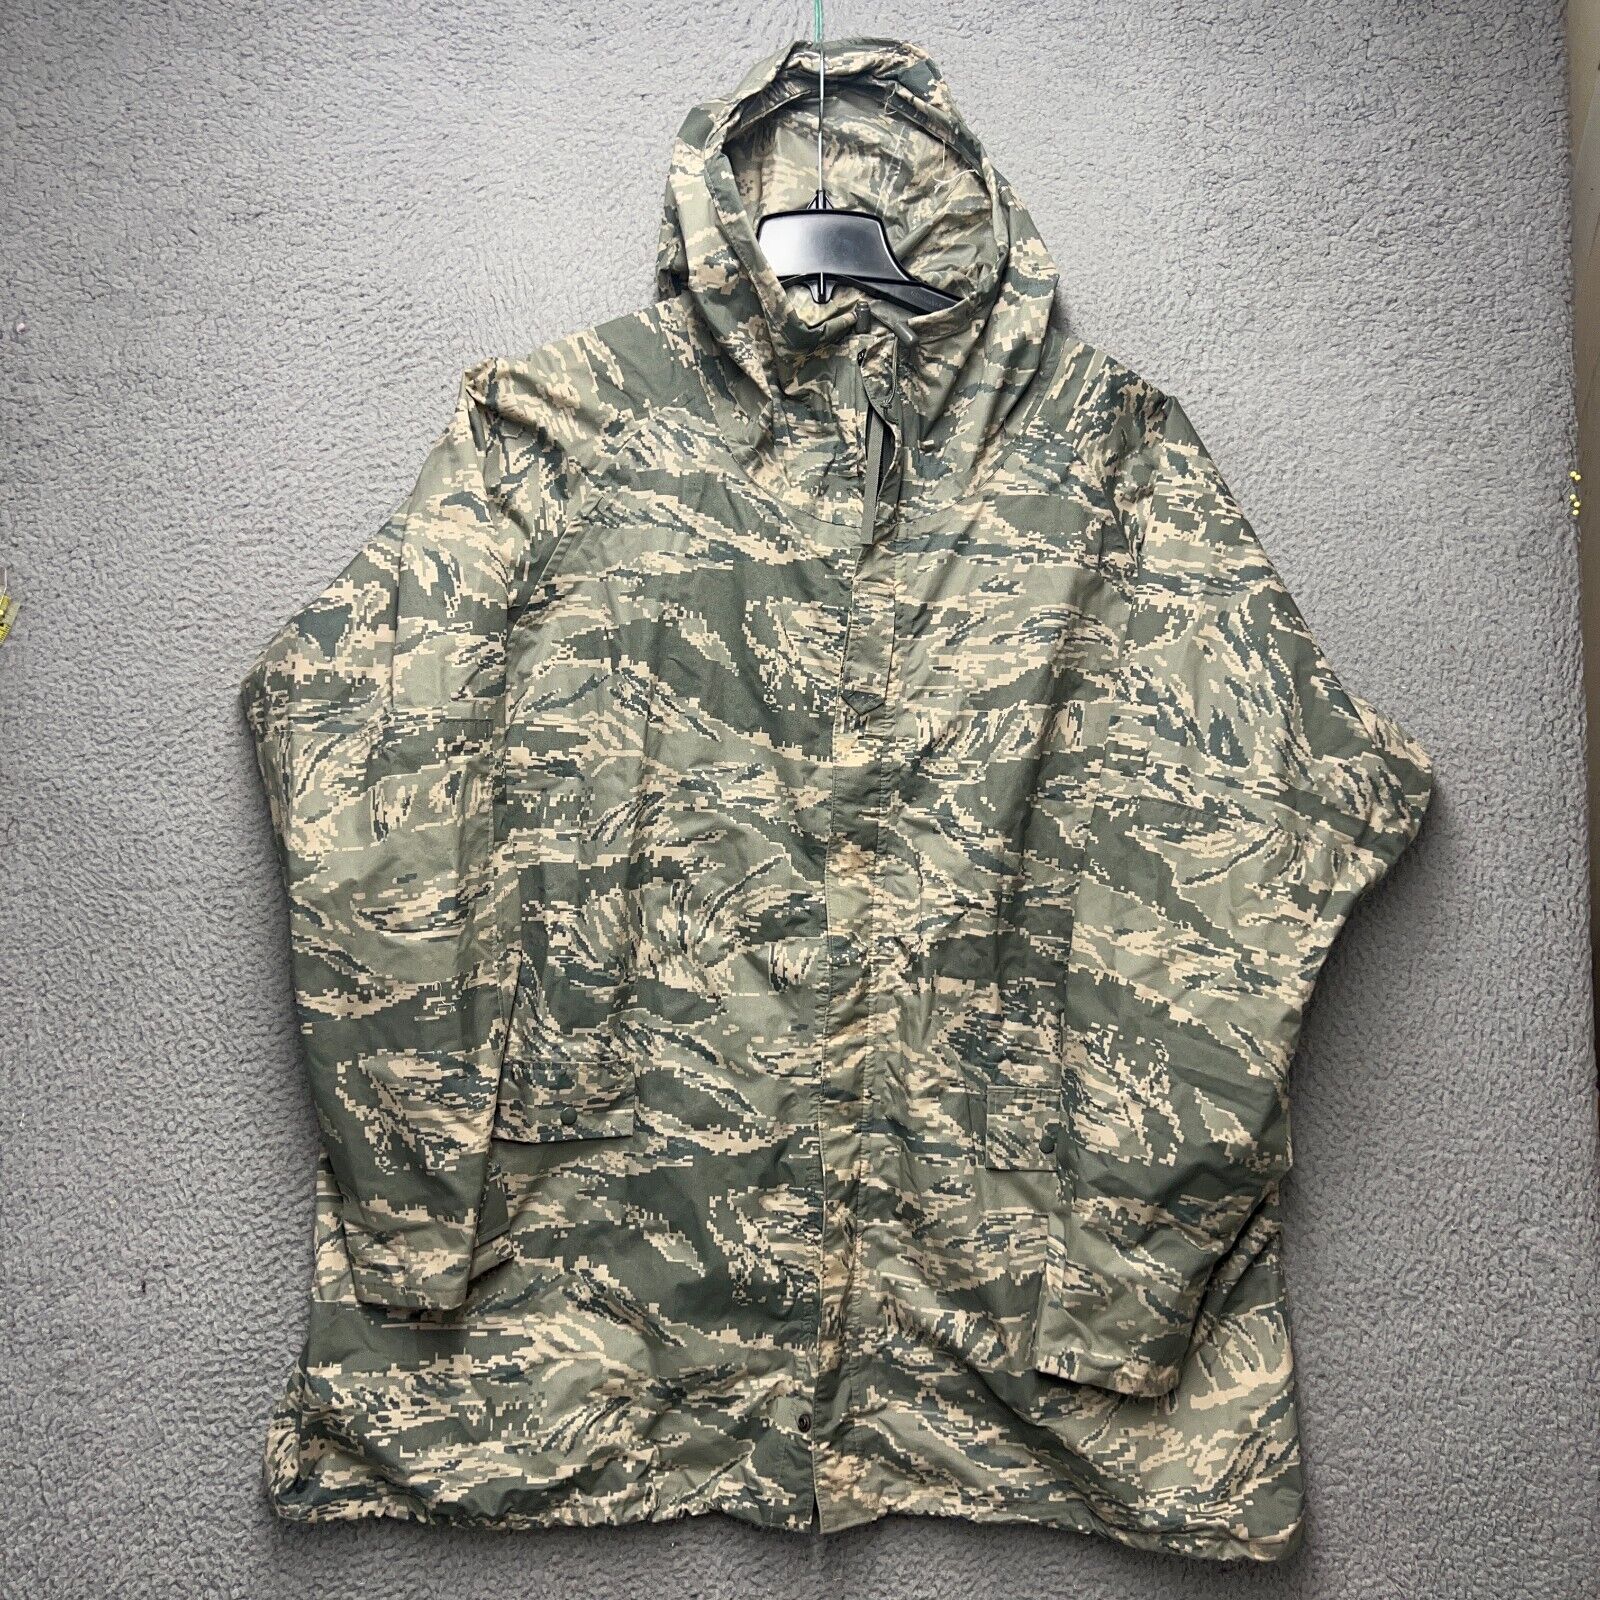 Parka Improved Rainsuit Men XL Green Camo Outdoor Hiking Orc Industries Military